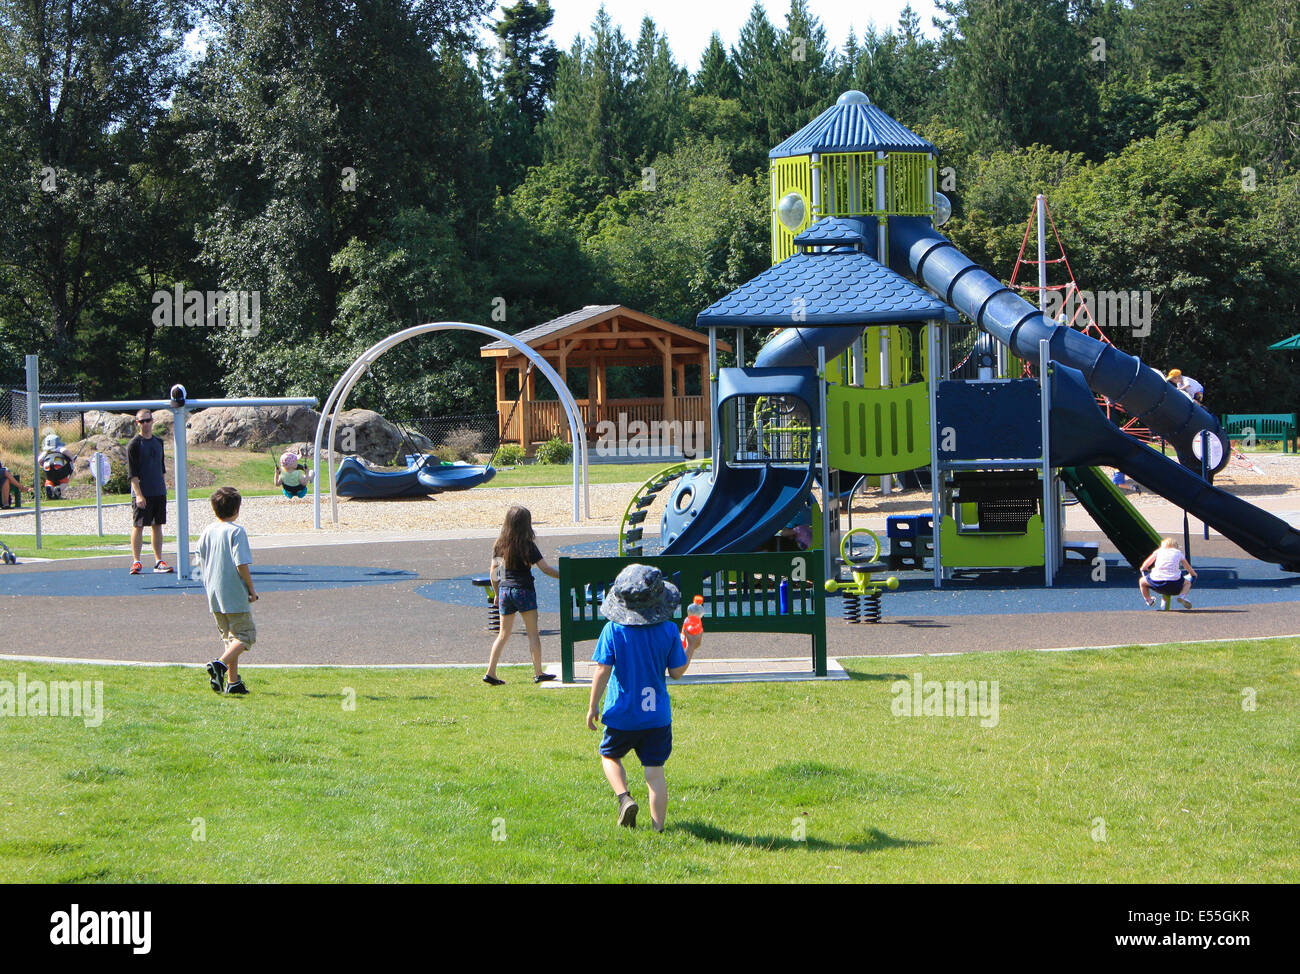 Children Having Fun in a Man Made Play Park with Slides Stock Photo